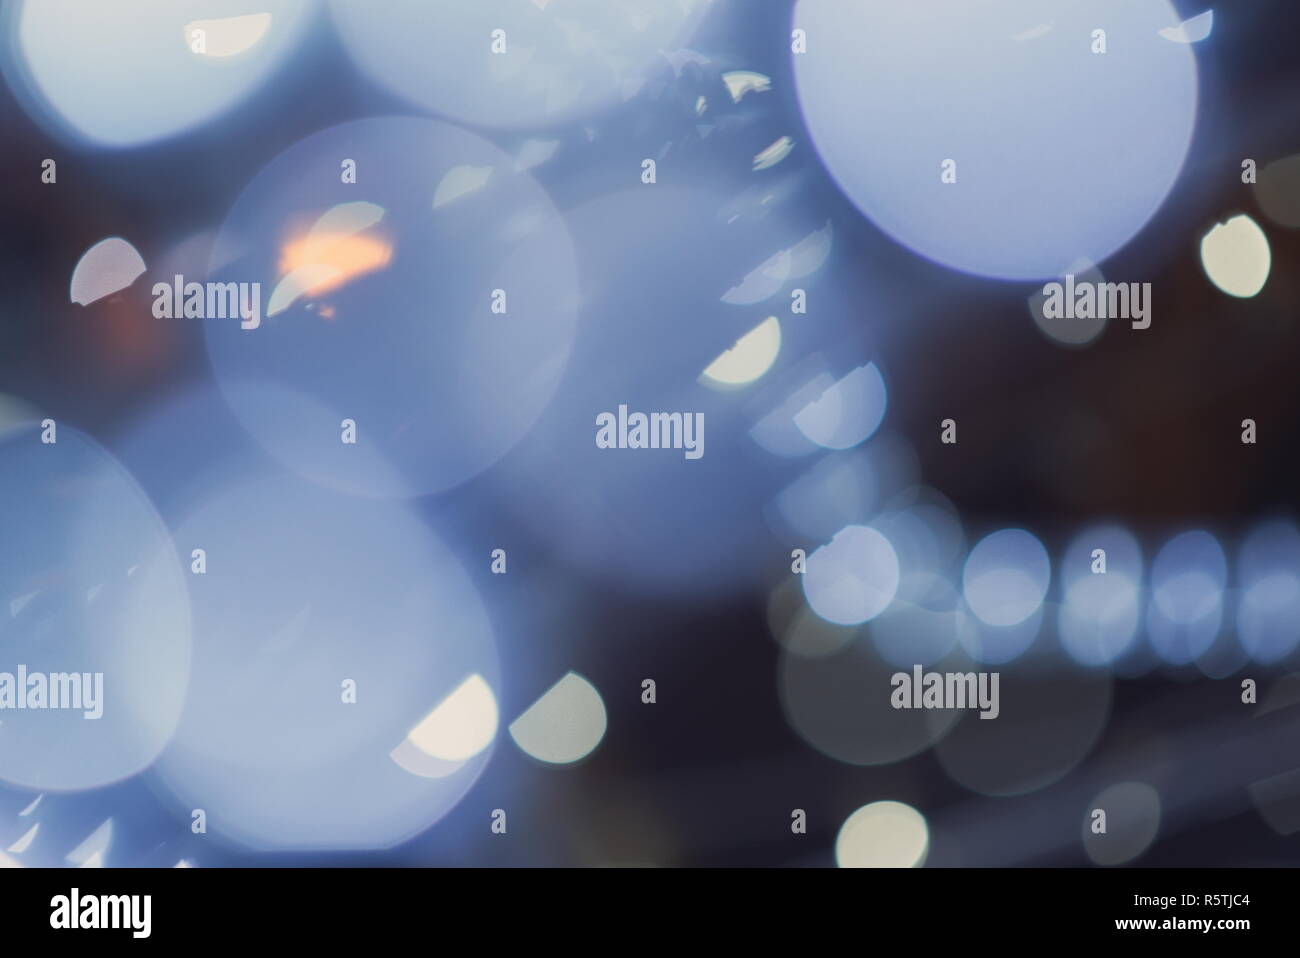 Blurred Blue and White Lights at Night Abstract Stock Photo